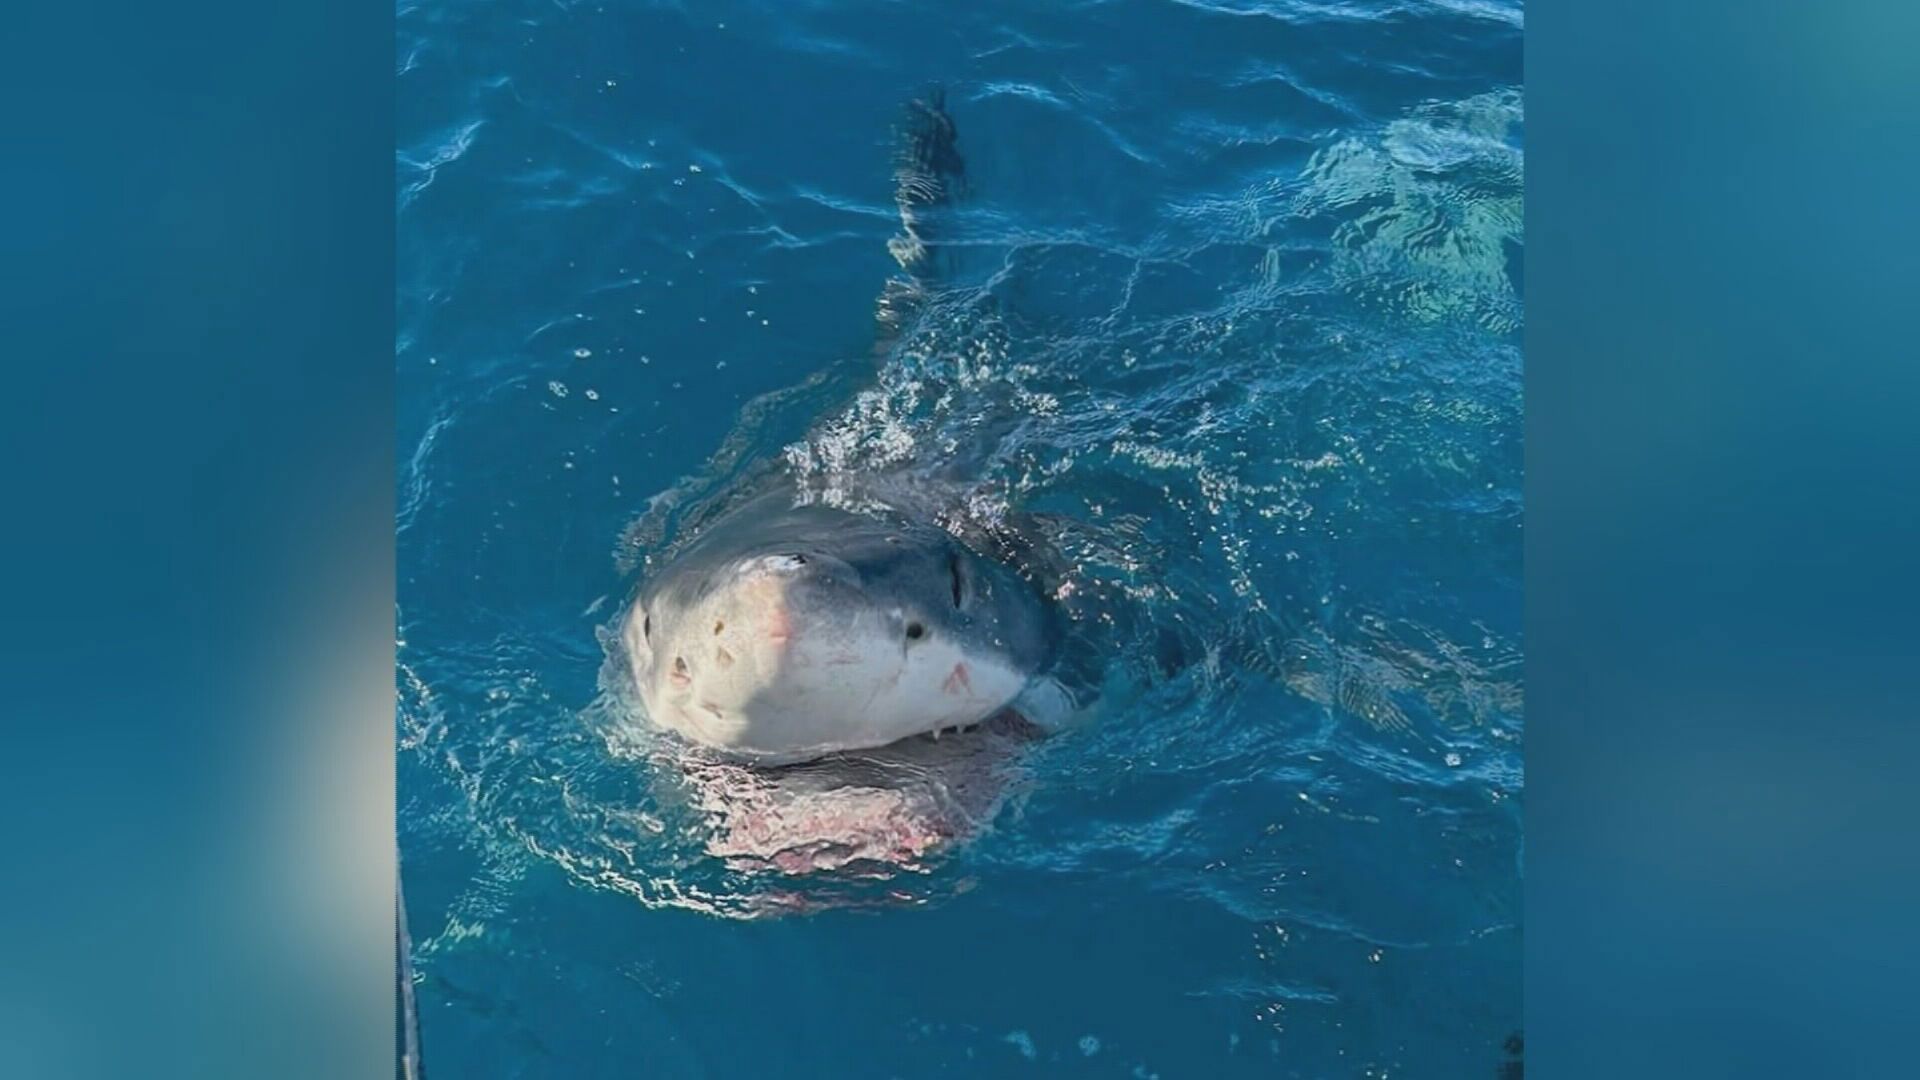 The great white shark mauled the angler's prized tuna catch off in South Australia.